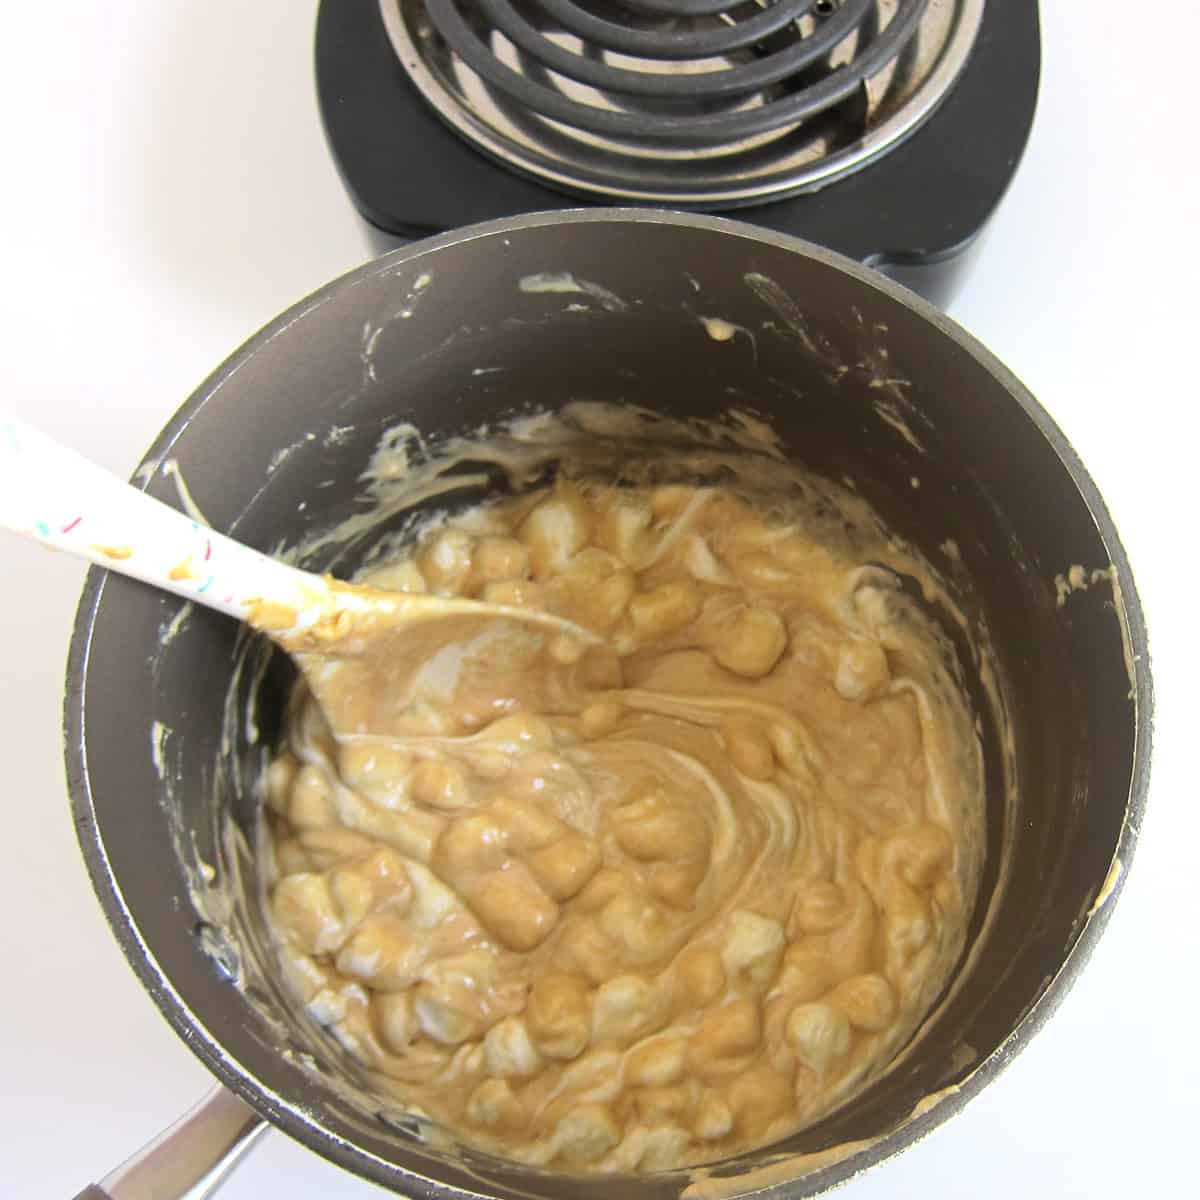 Stirring the melted marshmallows, peanut butter, and butter.